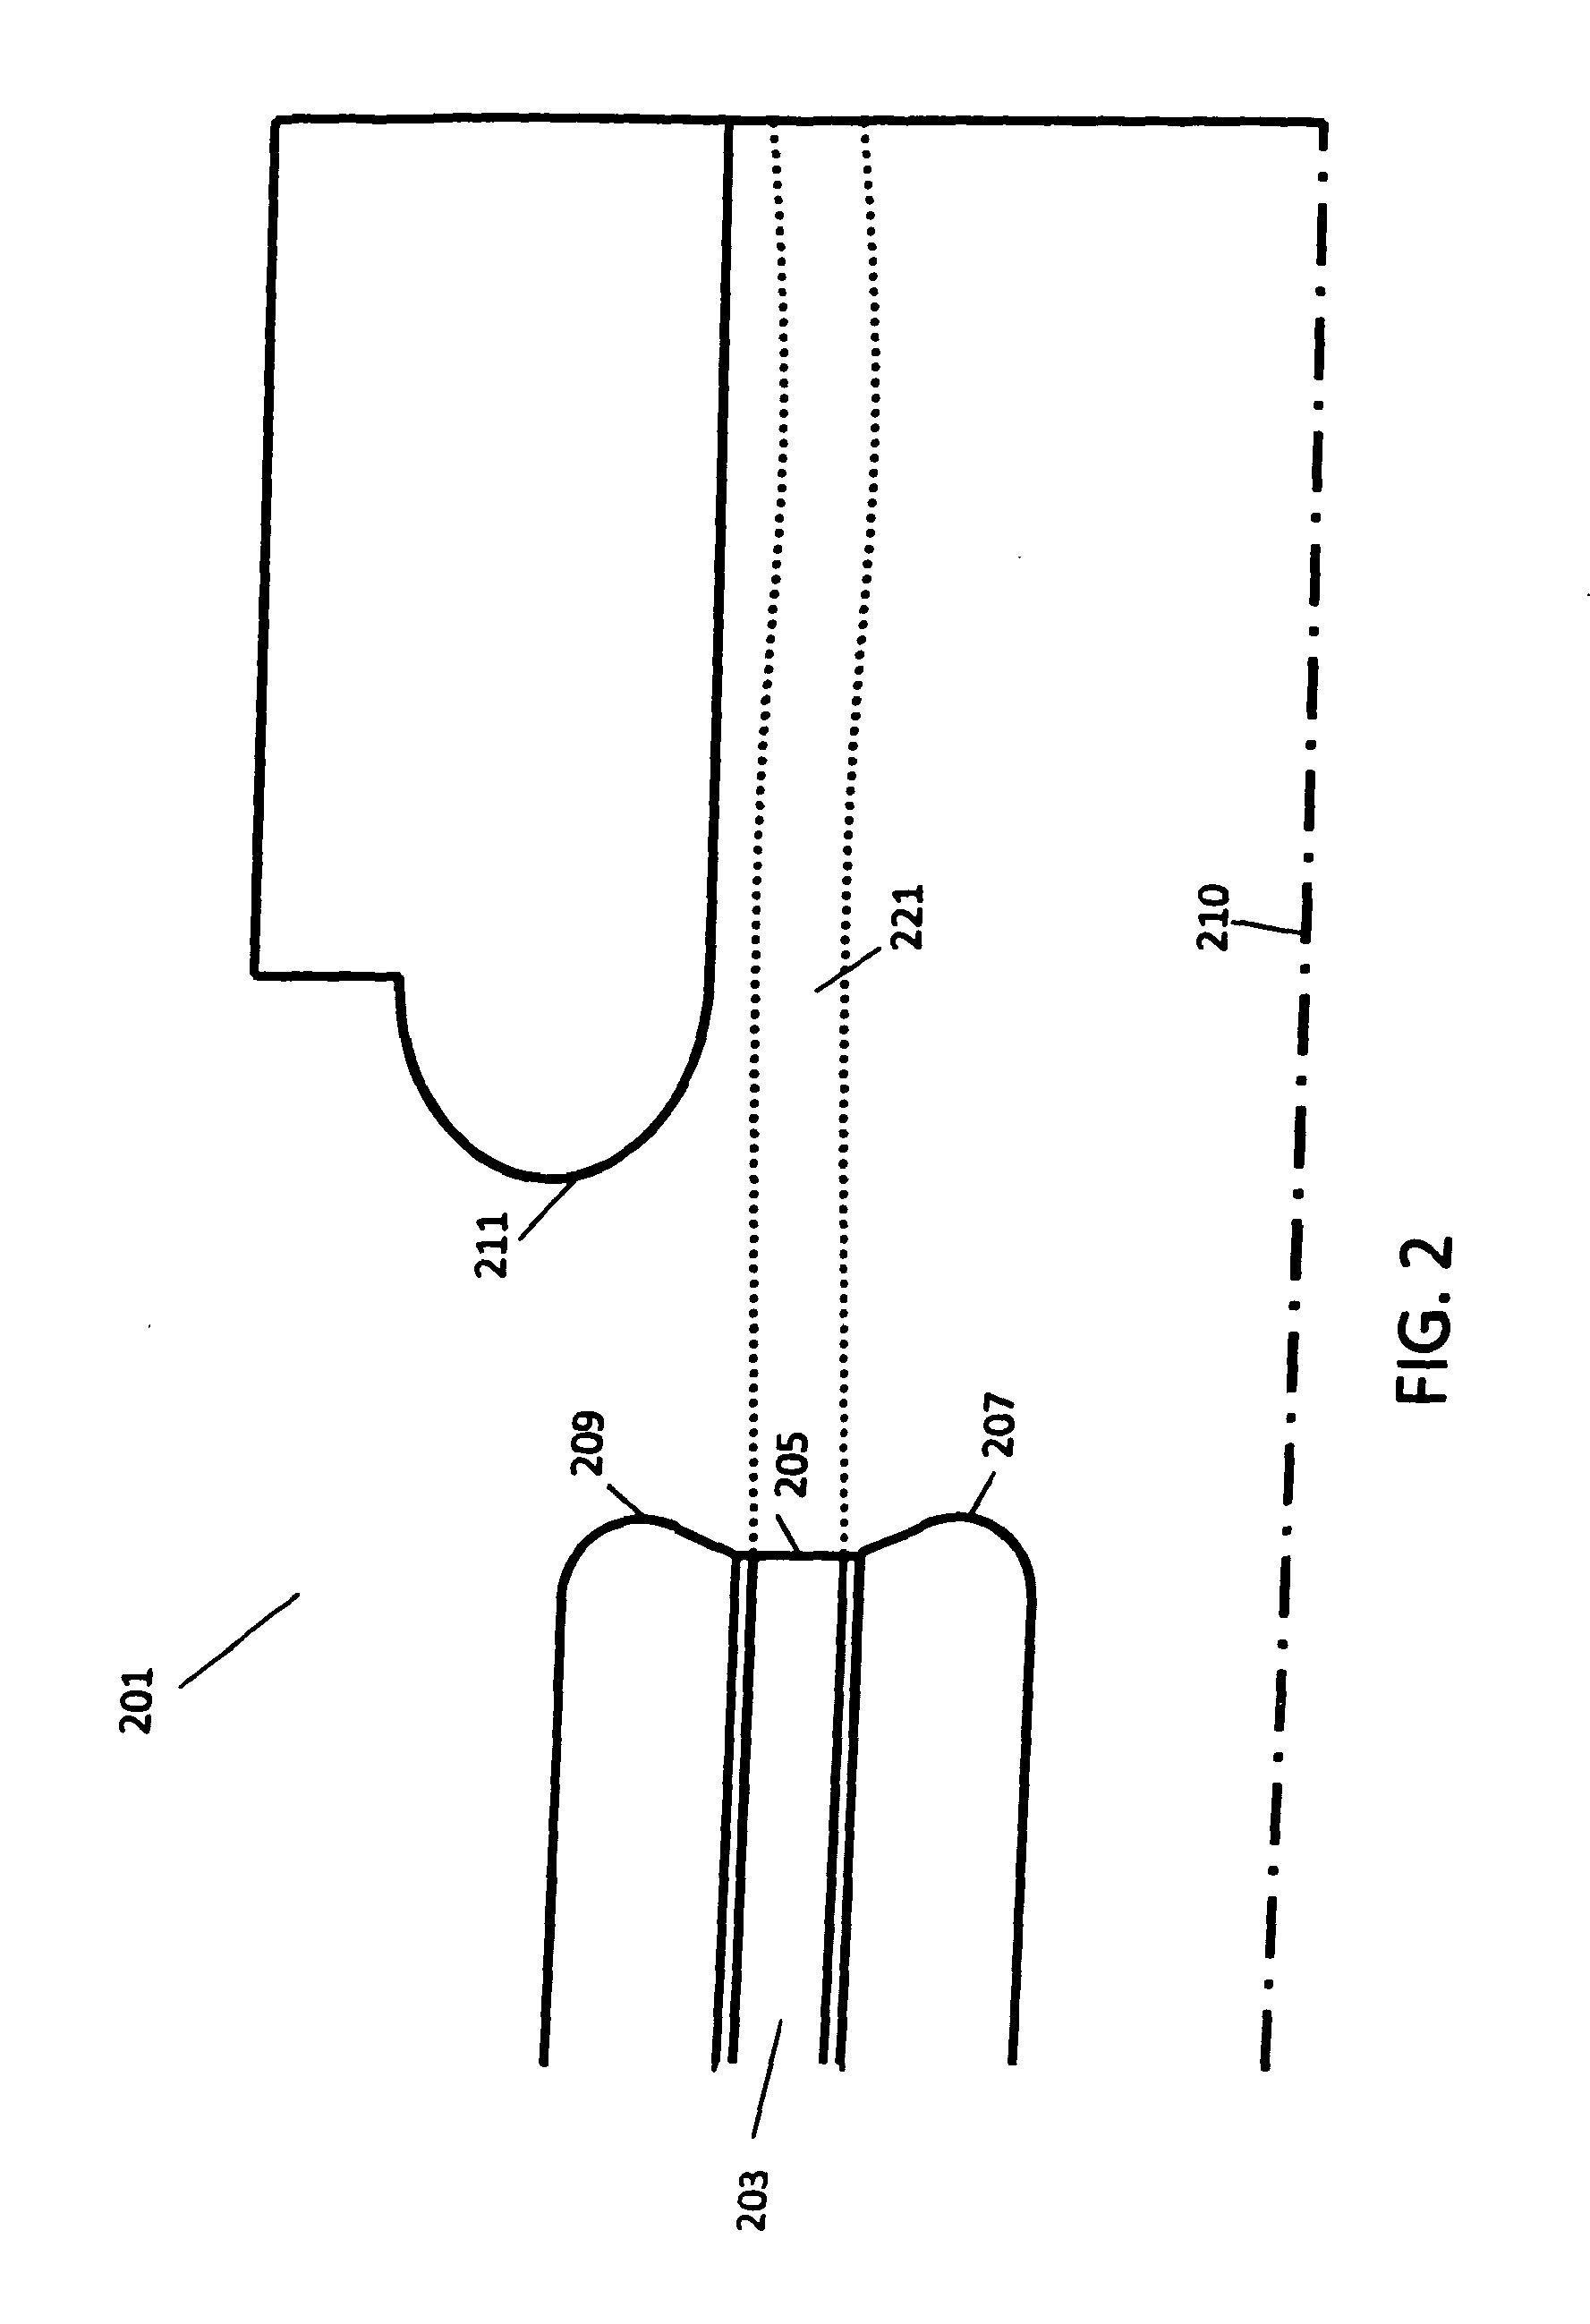 Hollow beam electron gun for use in a klystron